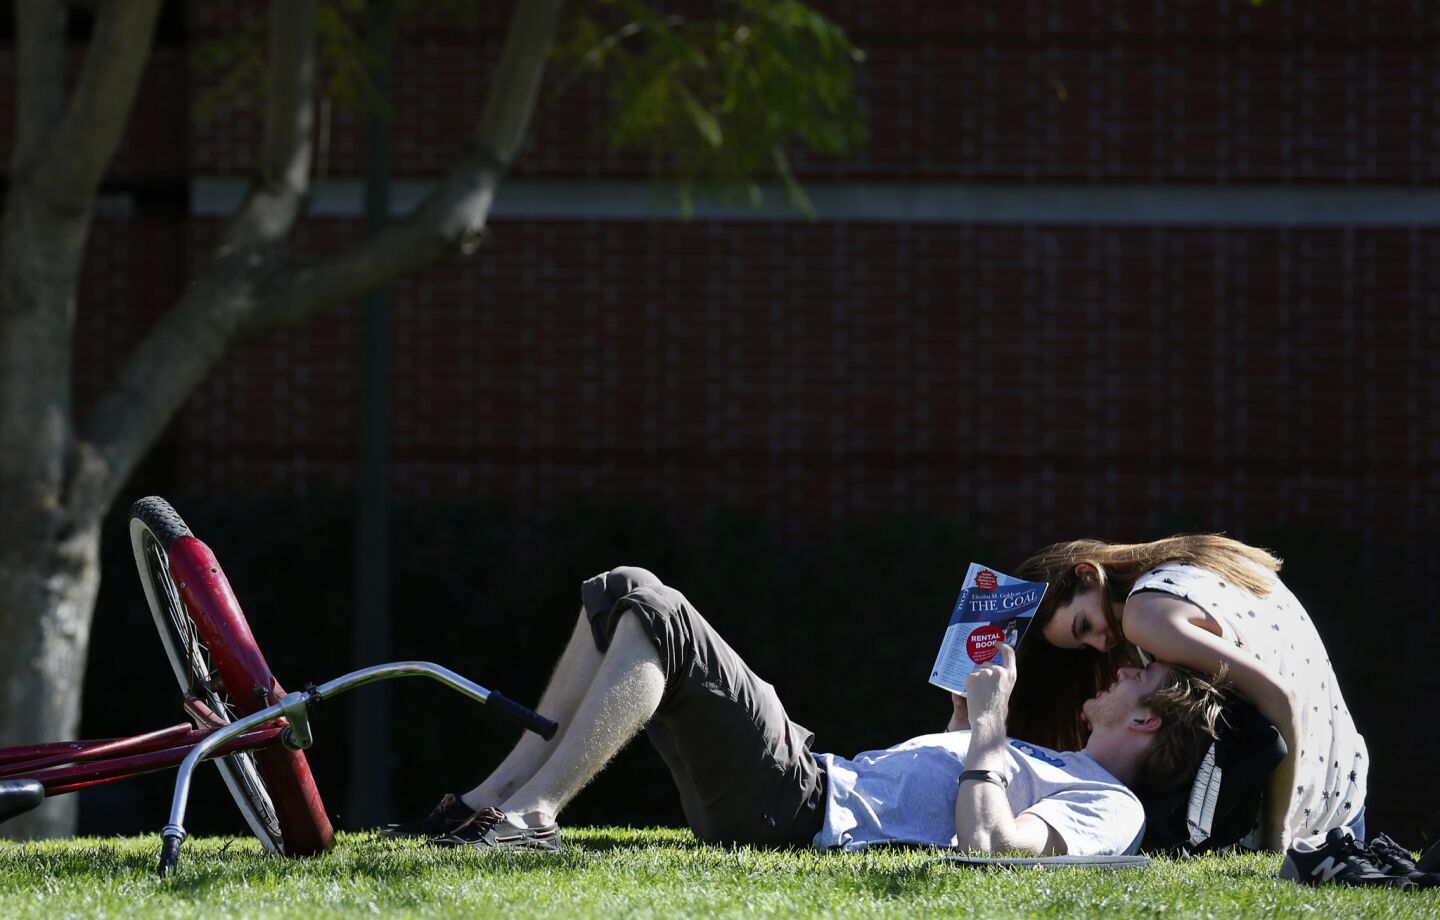 USC students Pat Corcoran and Alexandra Plzak enjoy the warm weather on campus Tuesday as temperatures reached a record 87 degrees in downtown Los Angeles.